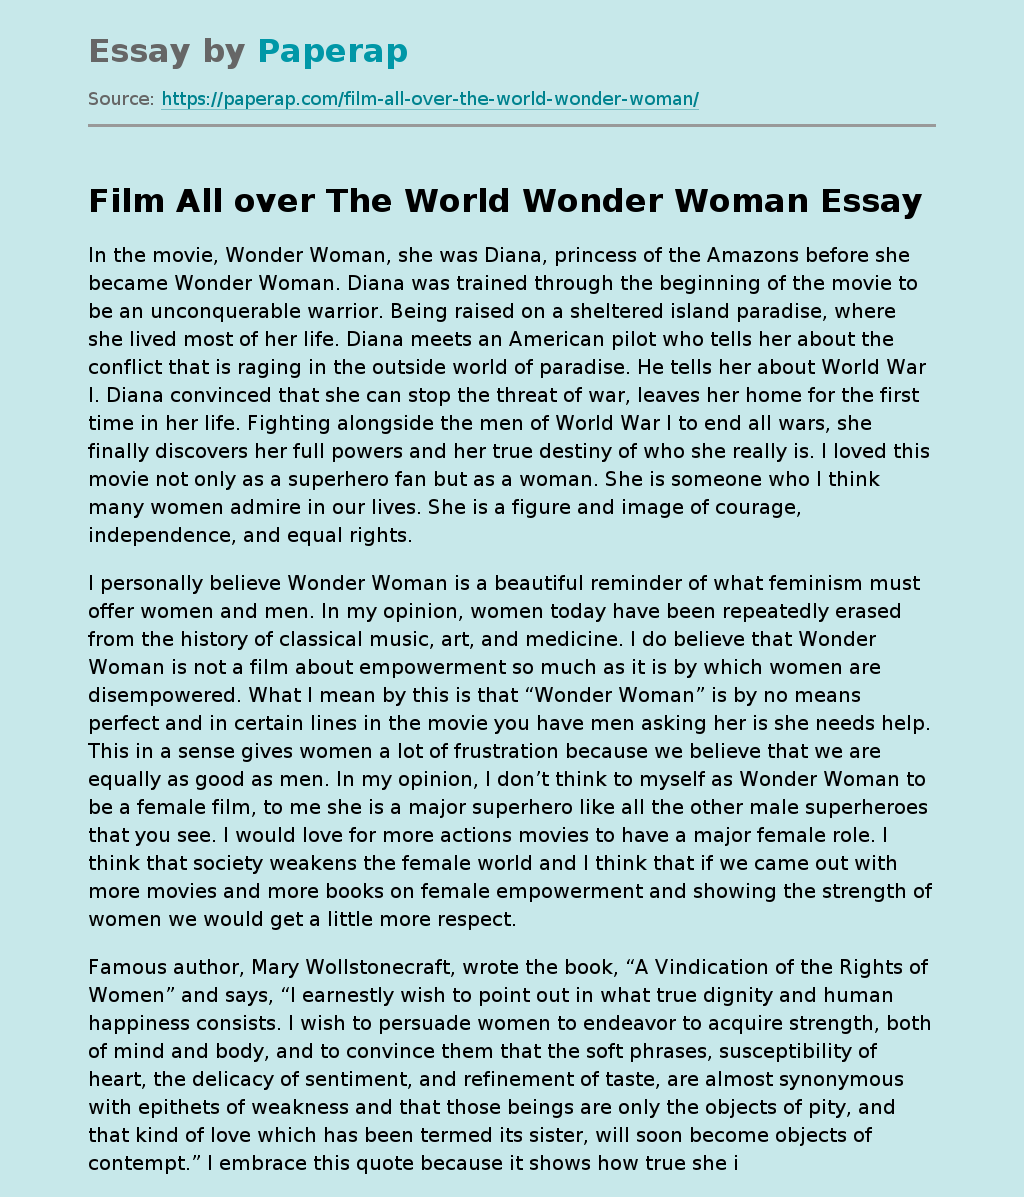 Film All over The World Wonder Woman